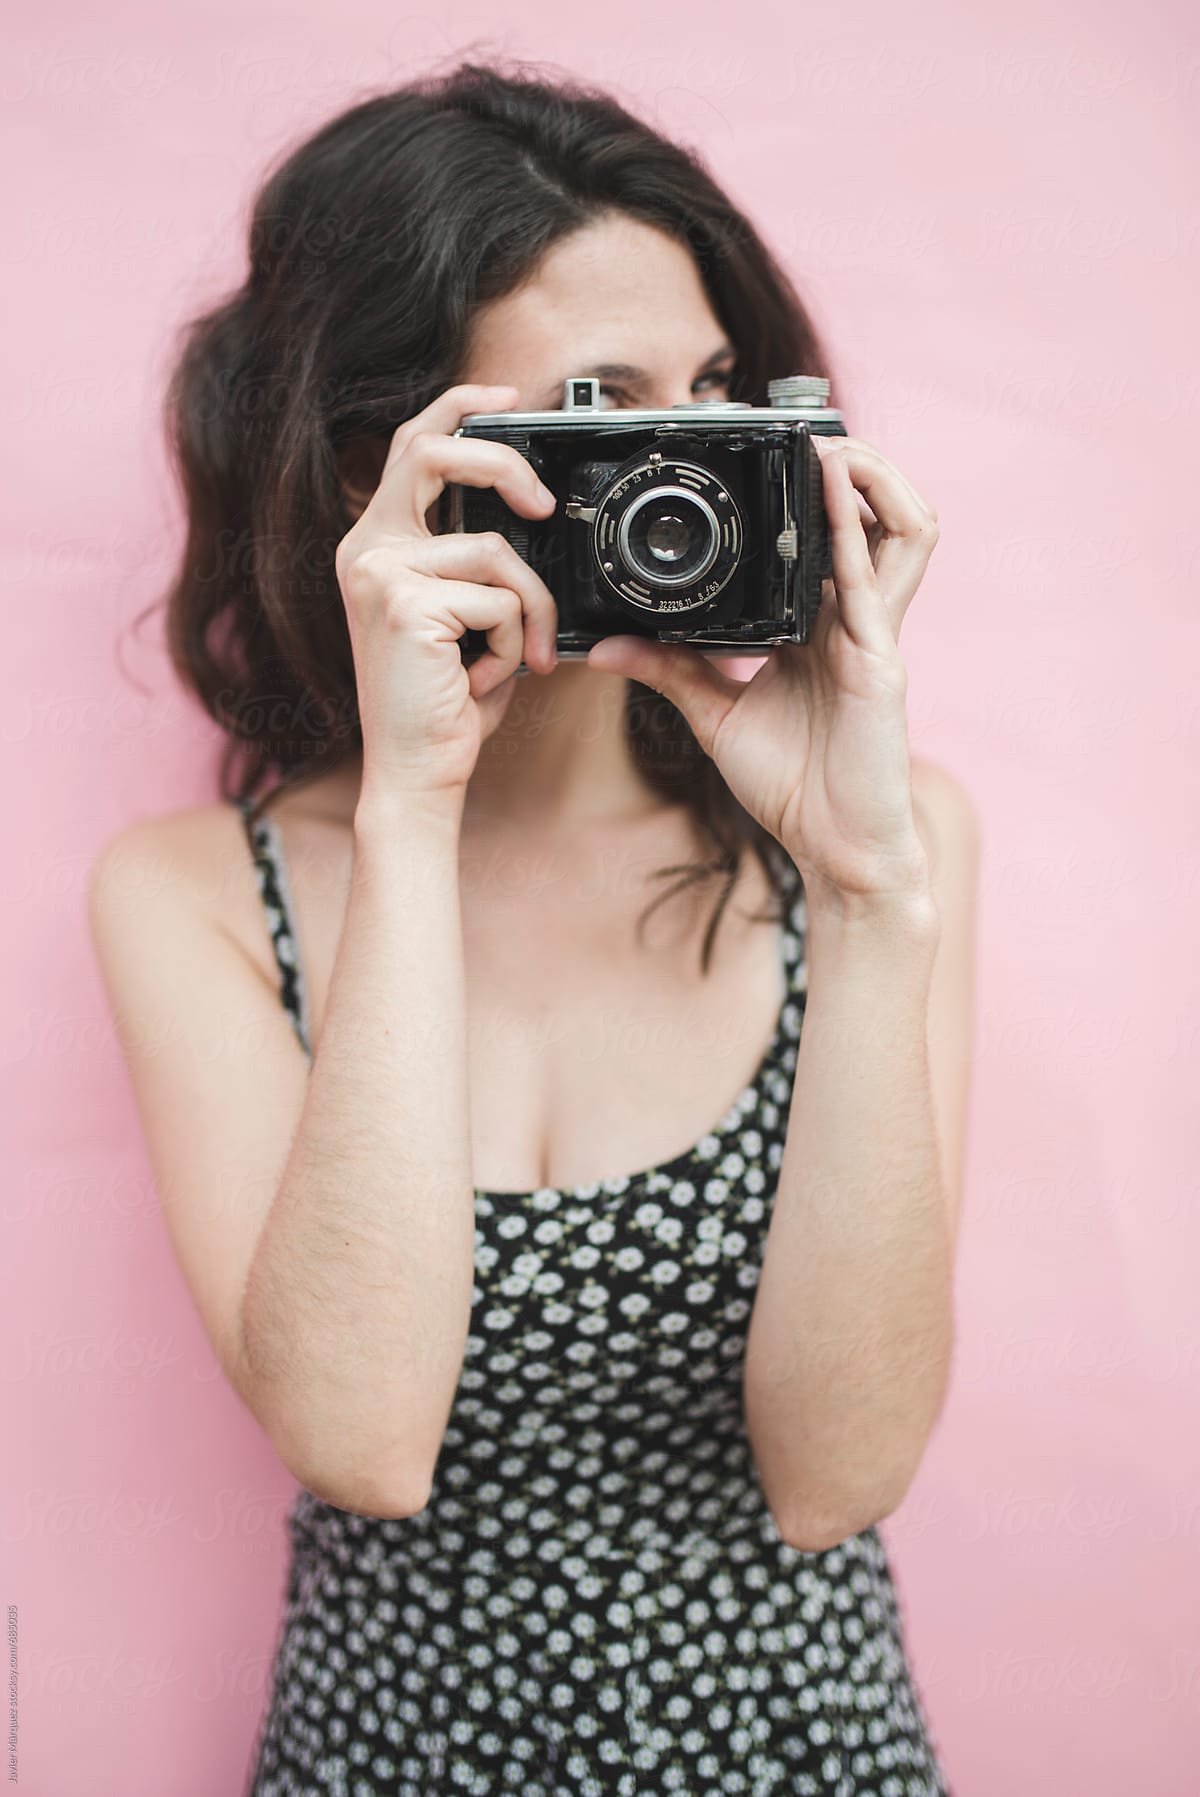 woman with old camera